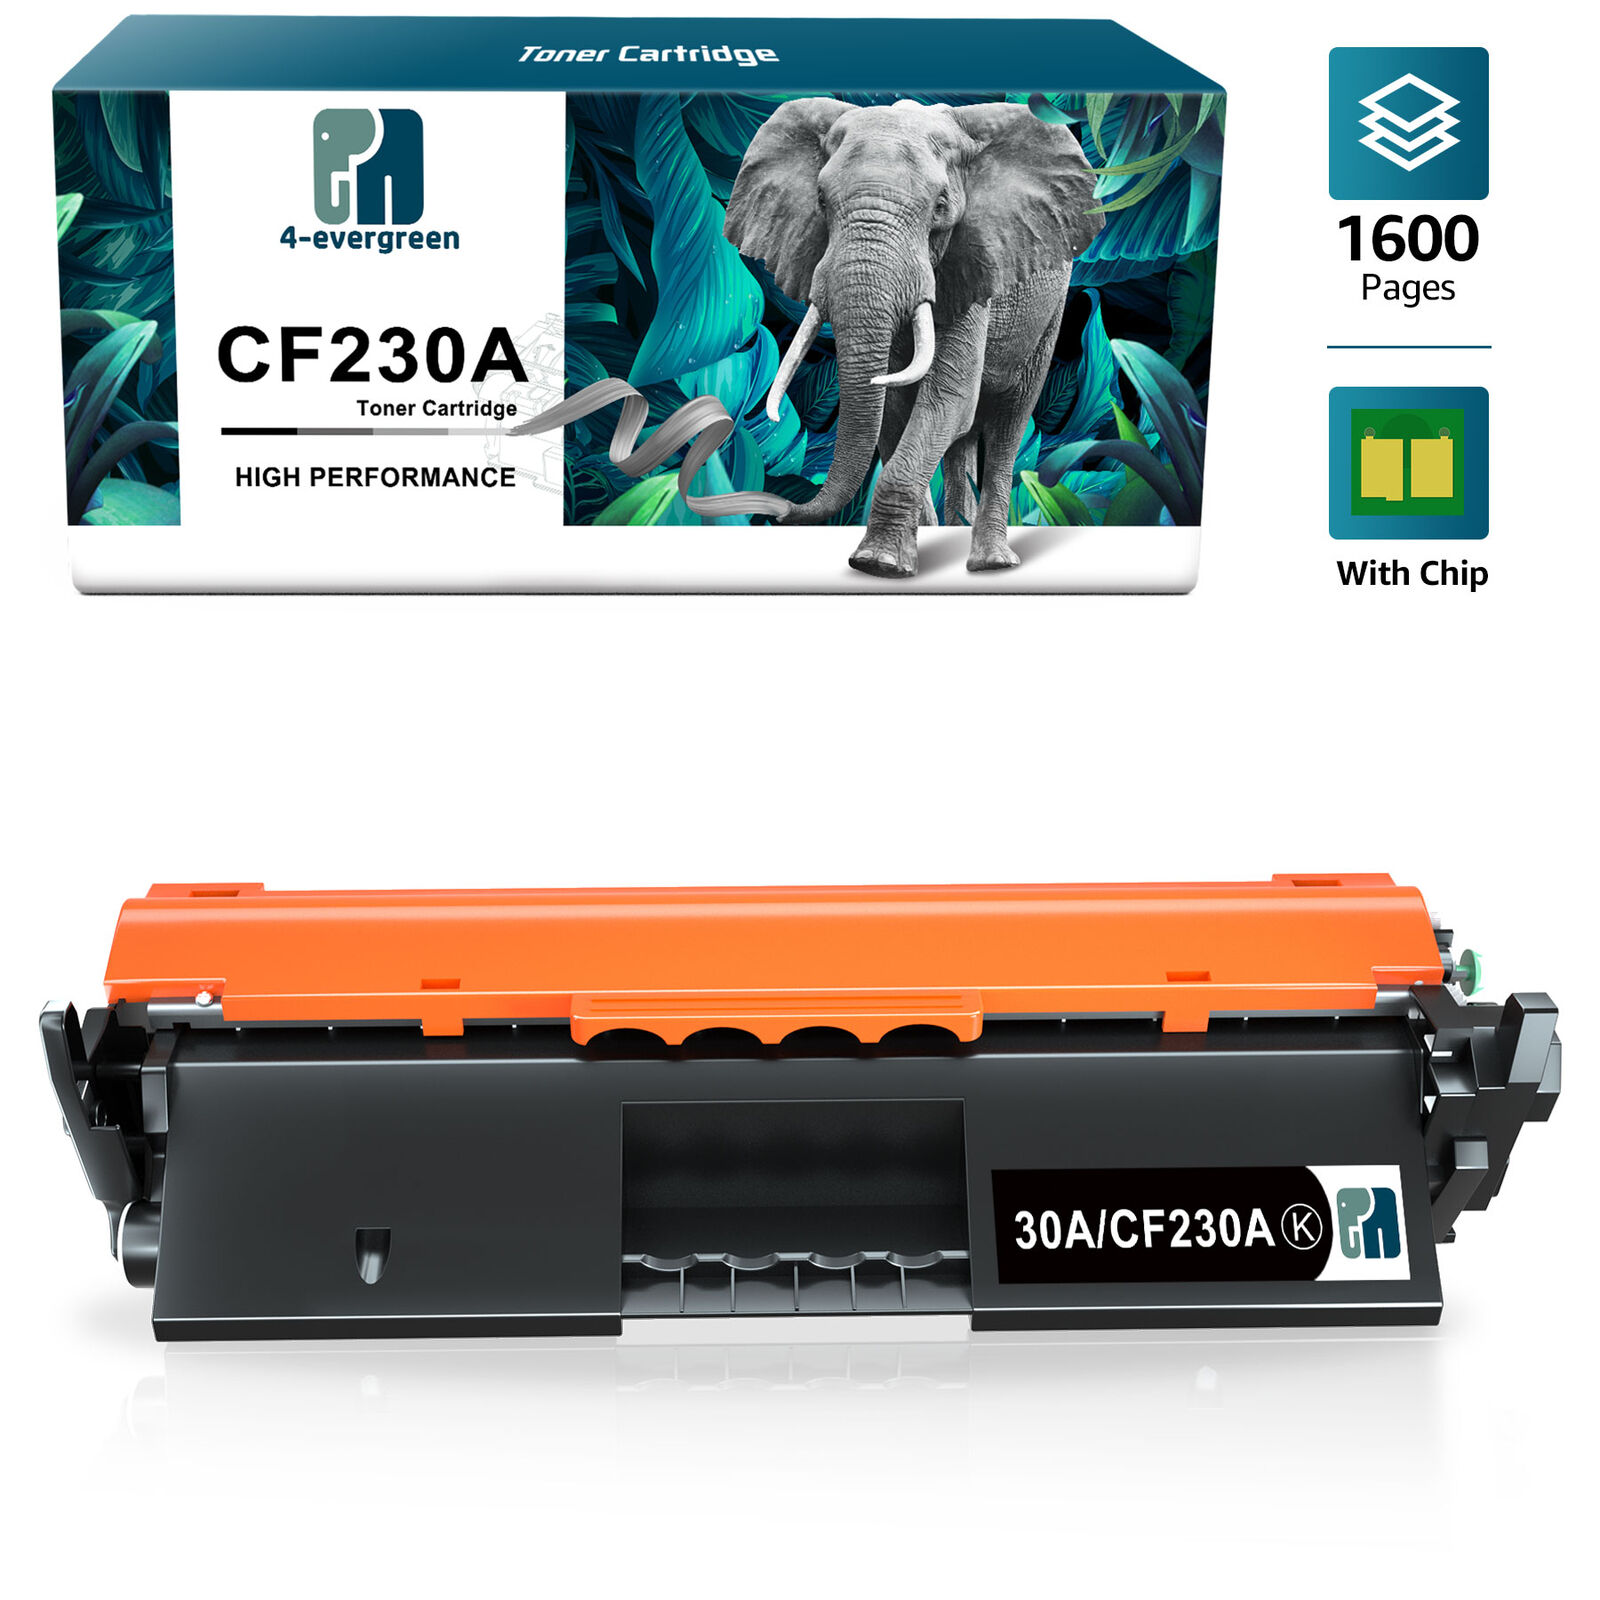 CF230A Toner Cartridge compatible with HP LaserJet Pro MFP M227fdn MFP M227sdn